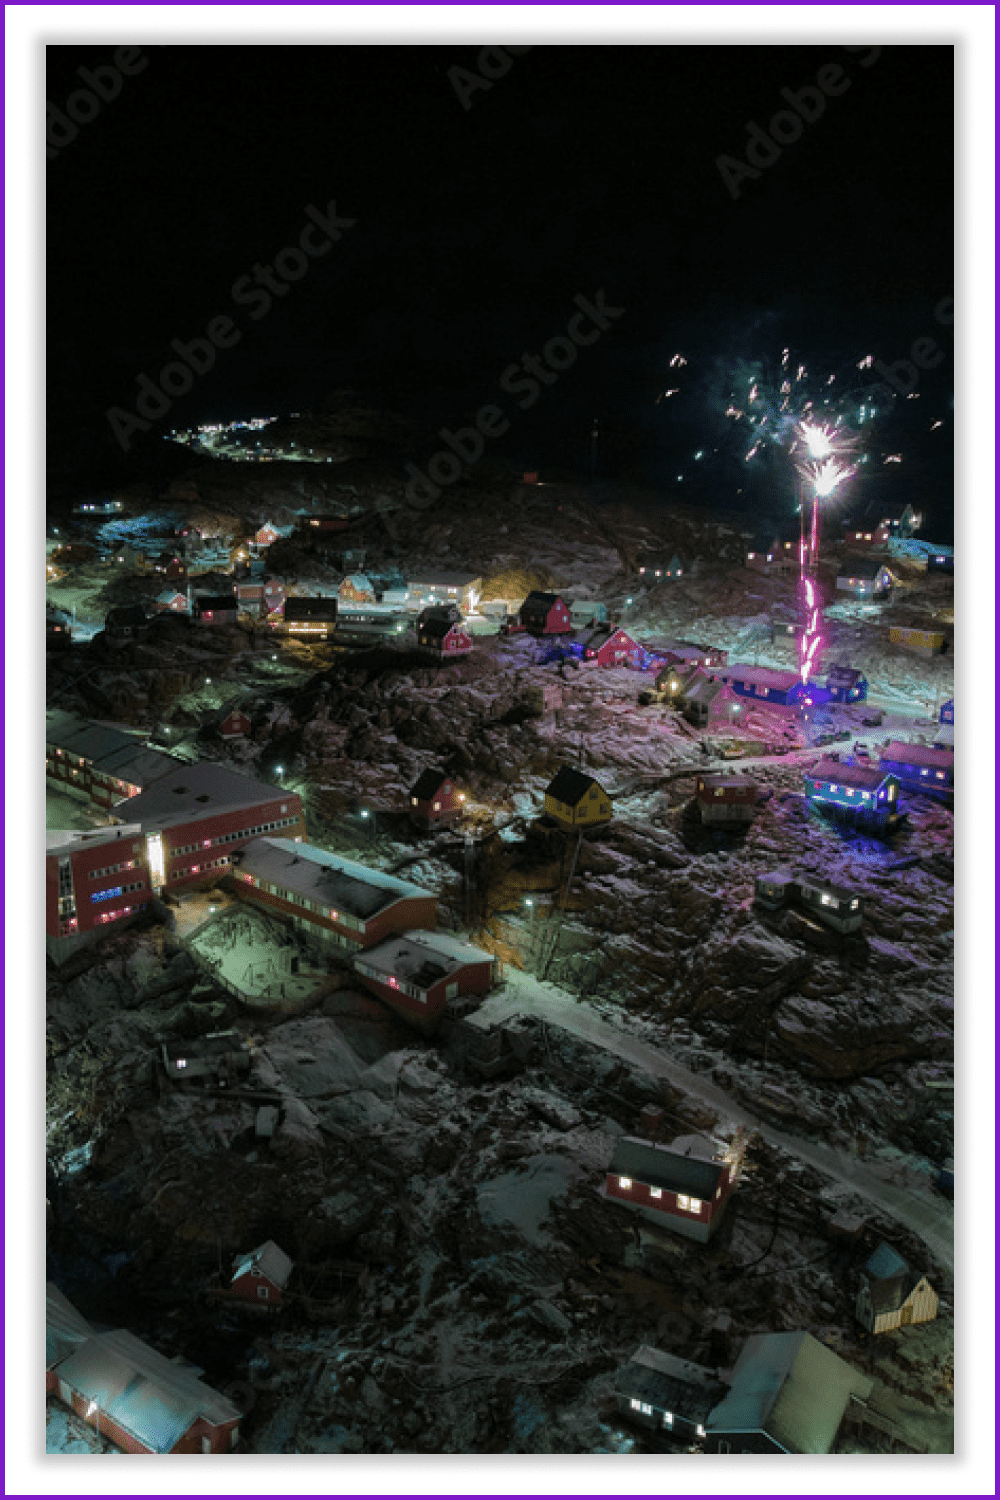 Photo of a snow-covered settlement in Greenland and fireworks against a dark sky.